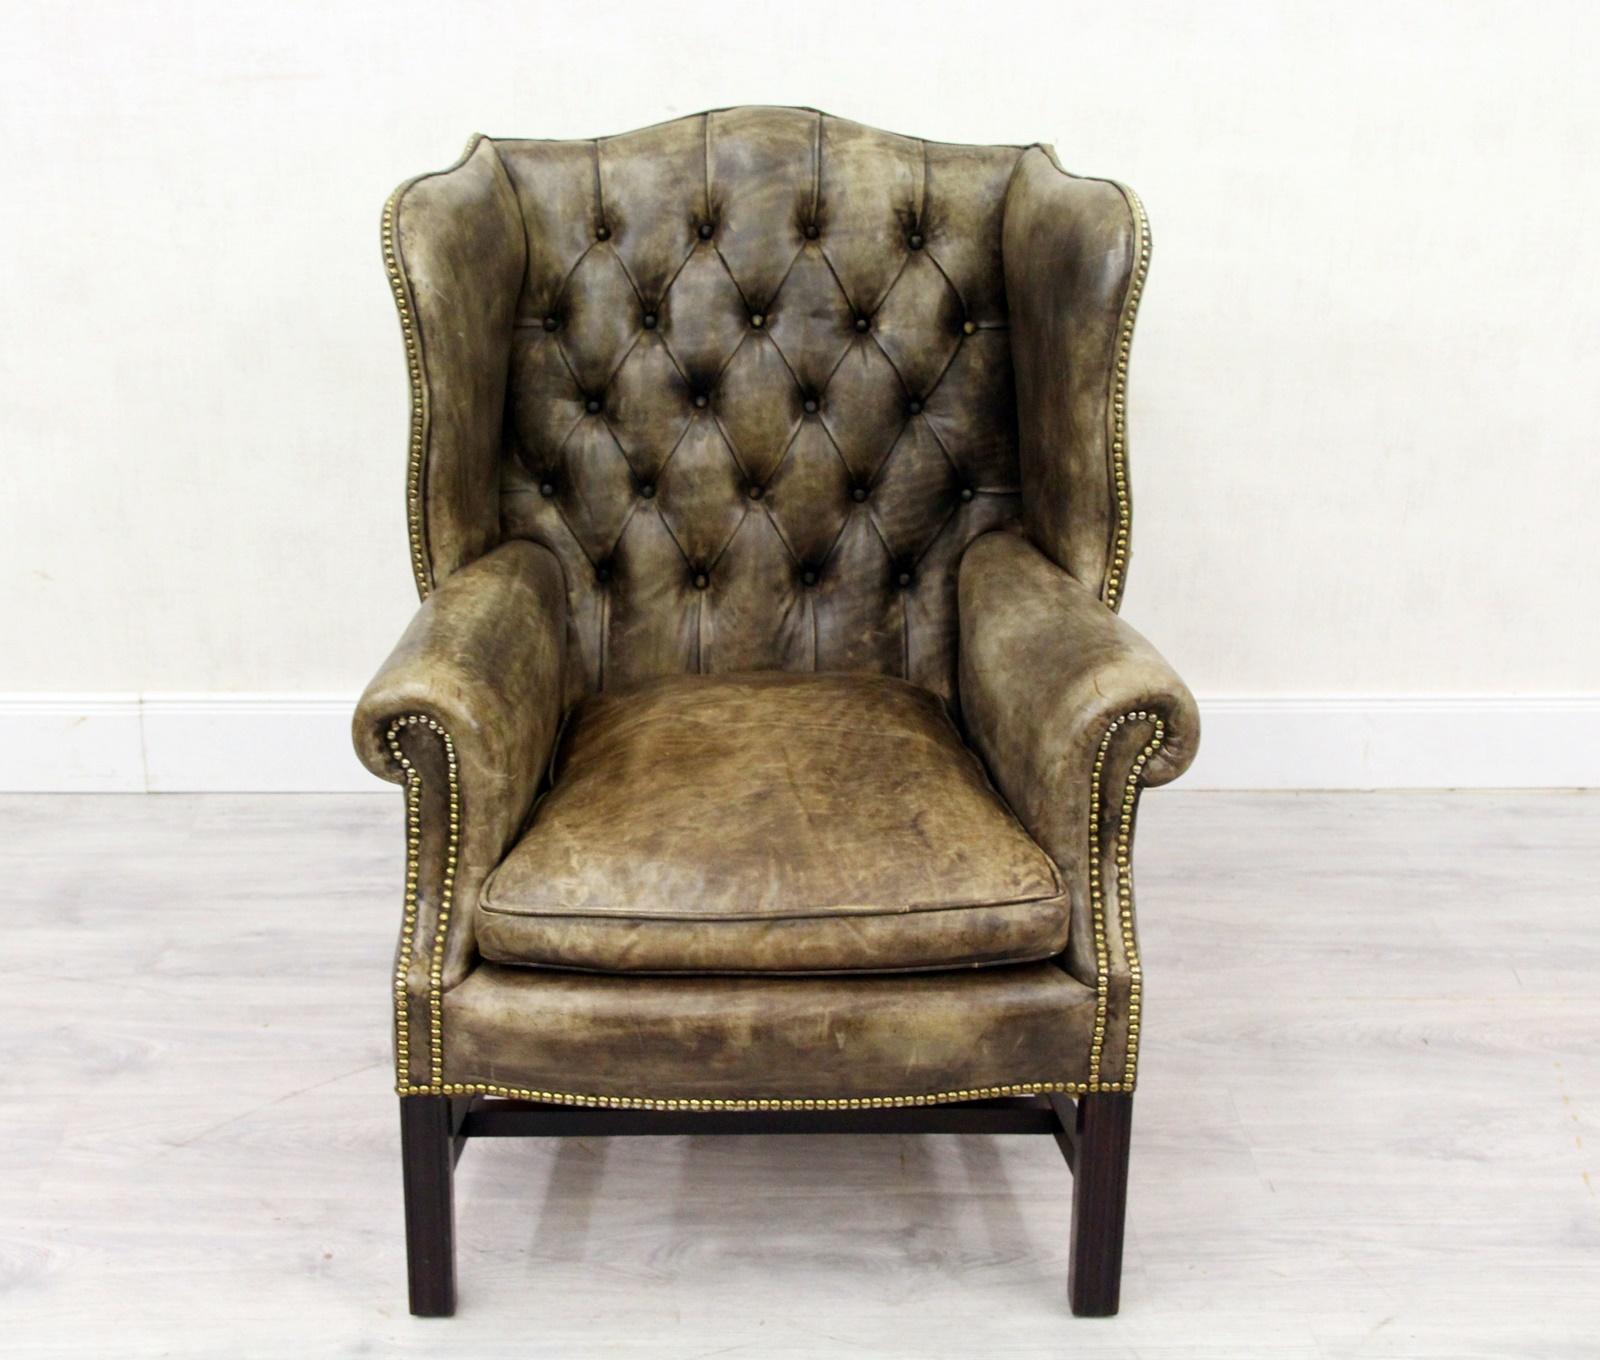 2 chesterfield armchair Antik
The shape is classic (wing chair)
armchair.
Measures: Height x 100cm, width x 75cm, depth x 80cm.
Color: kaki / gray
Pillows: down pillows
Condition: The armchairs are in a very good condition for the age and